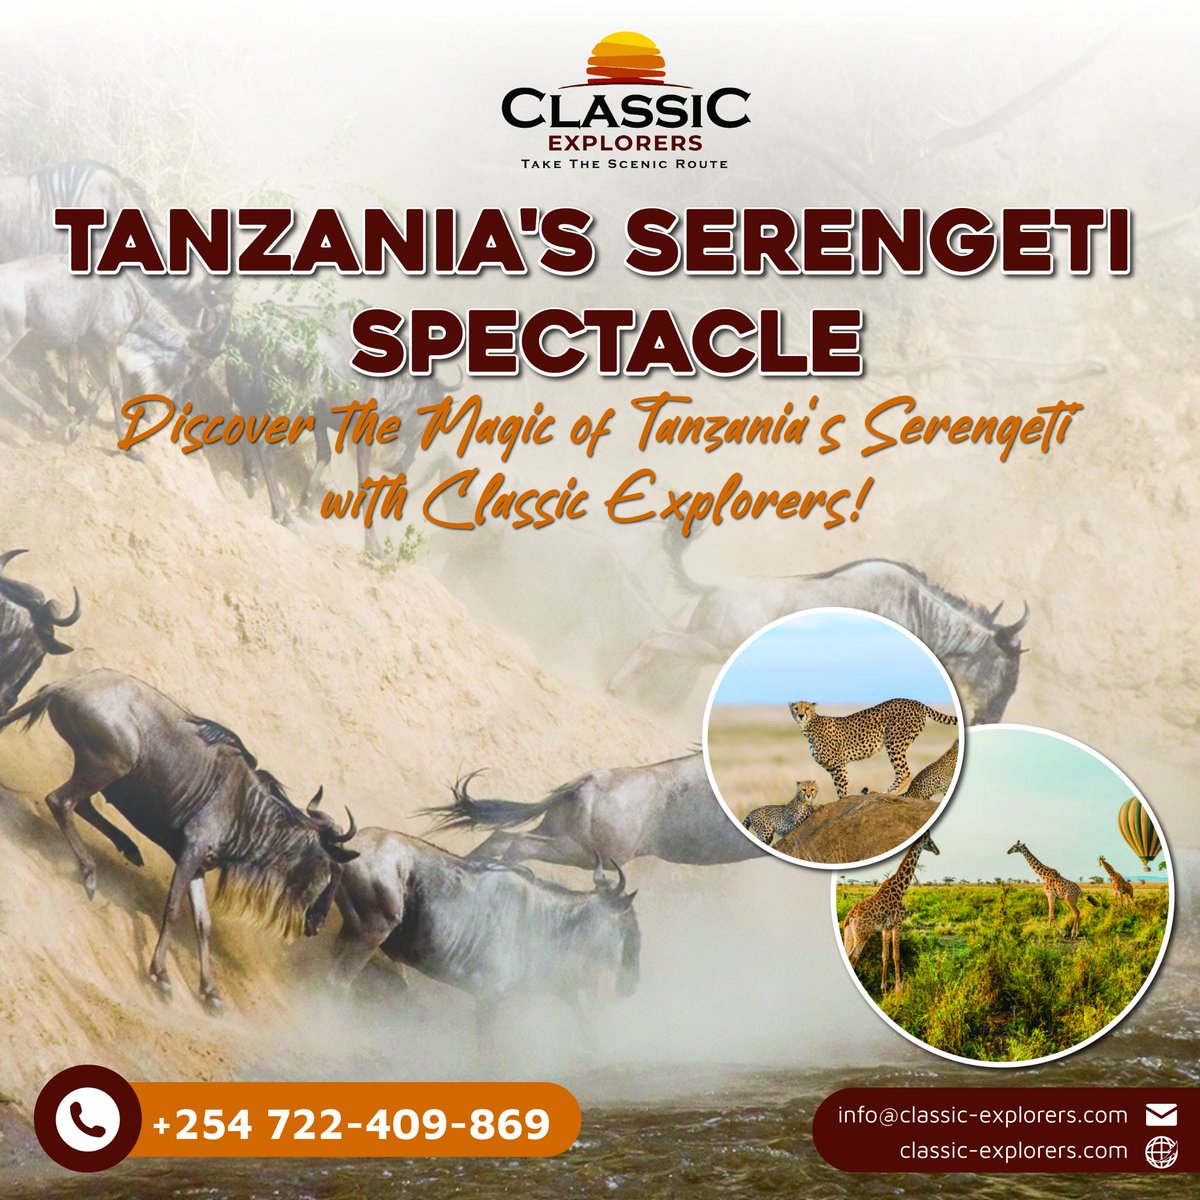 Join us on a journey through this wilderness, encountering incredible animals and breathtaking scenery. End your day with an adventure-filled evening and a memorable dinner, Call or WhatsApp 0722409869 #serengetinationalpark #serengetisafari #classicexplorers #tanzaniasafari